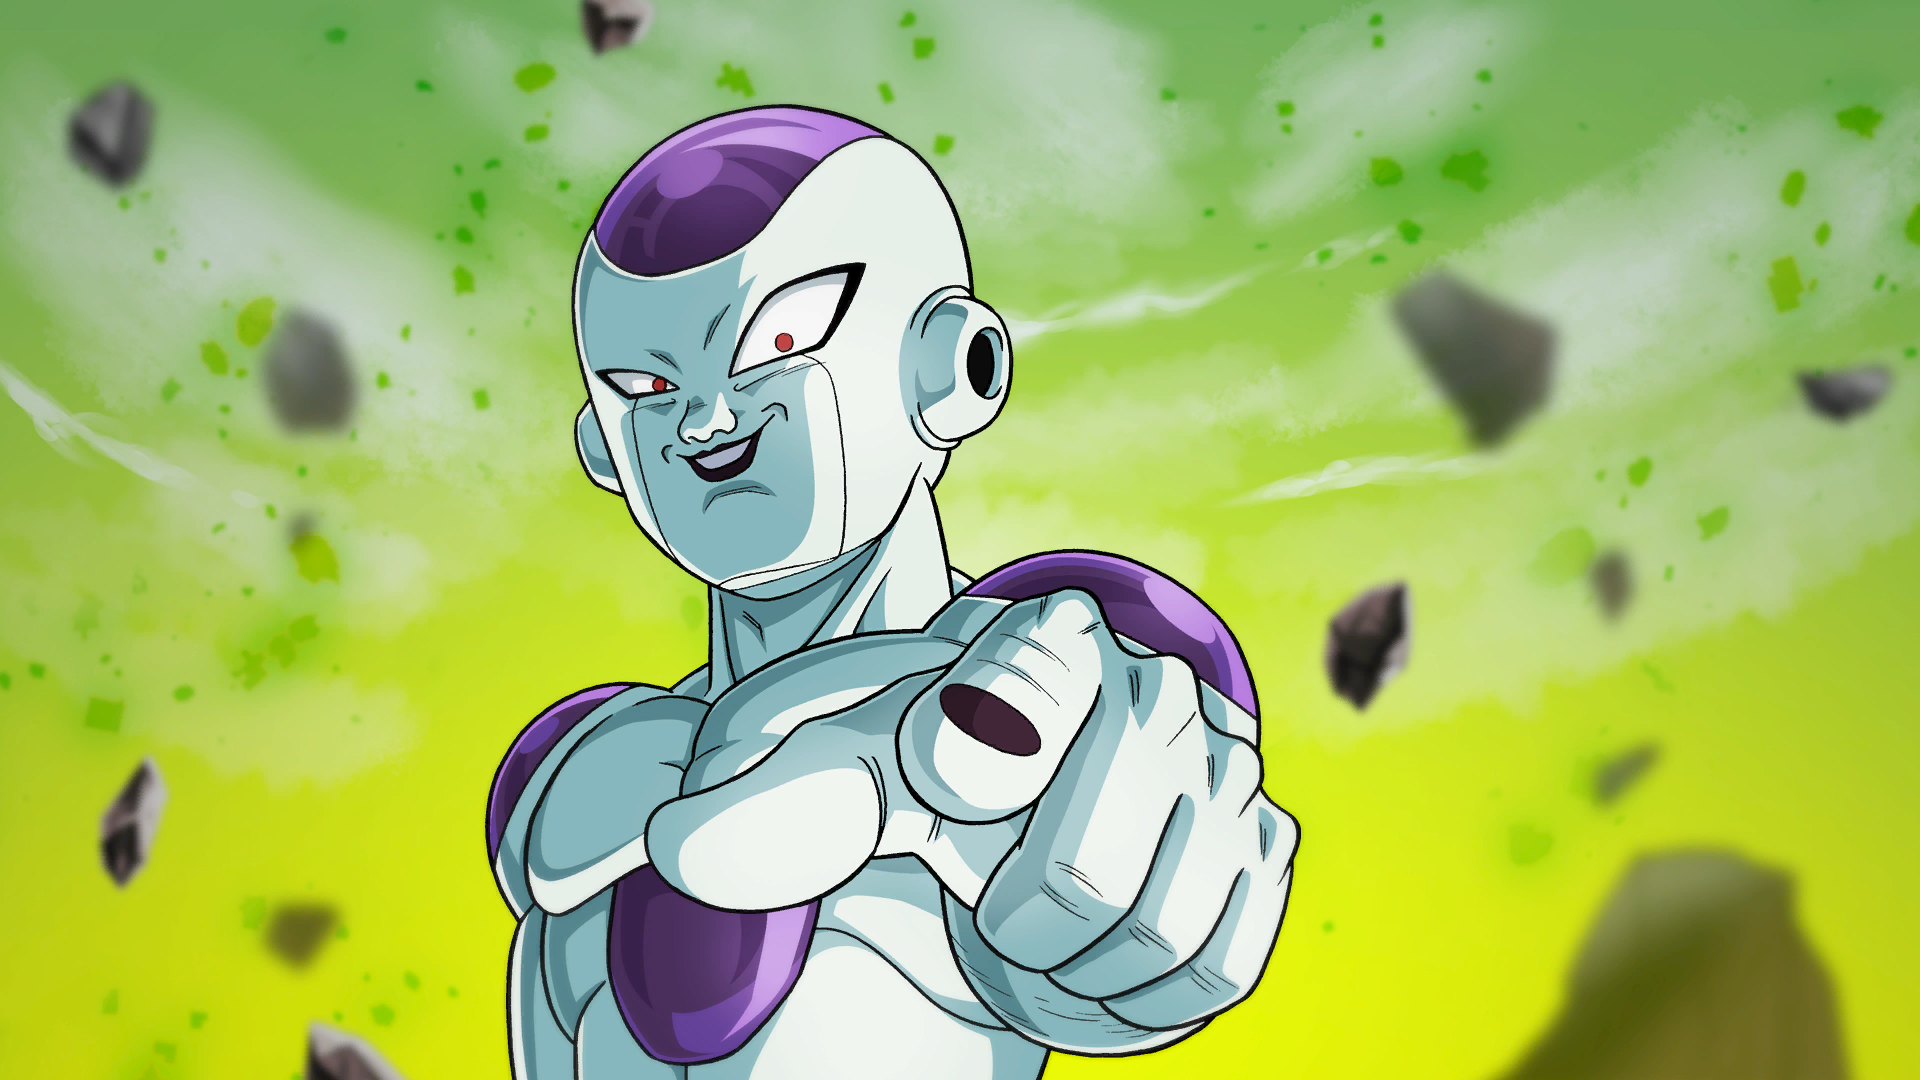 Anime 1920x1080 Dragon Ball Z rocks Dragon Ball Super finger pointing blurred looking at viewer blurry background anime creatures Frieza